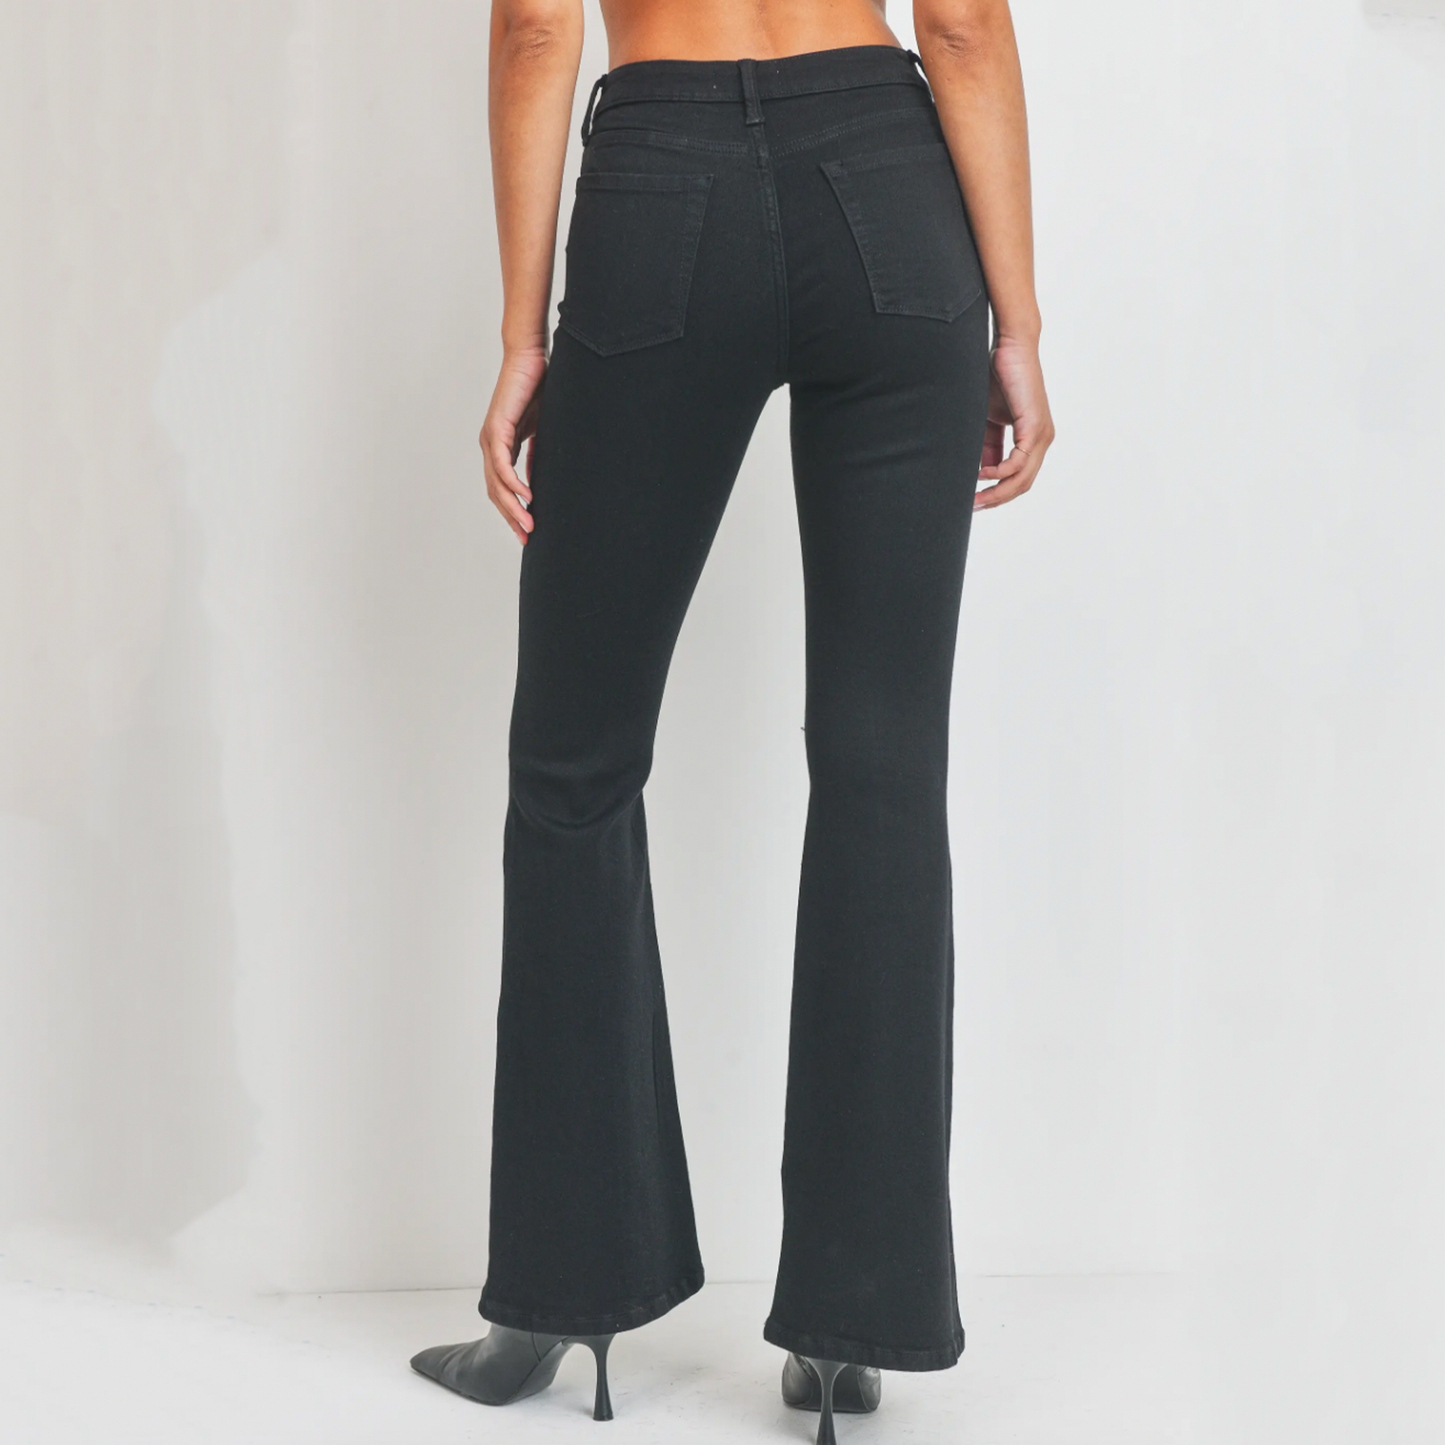 Just Black Denim Pintuck Classy Flare Jean. The Flare Jean is our new denim obsession! These high-waisted, flare jeans are perfect for the upcoming fall season. The perfect jean to dress up or down, these are a must have! 